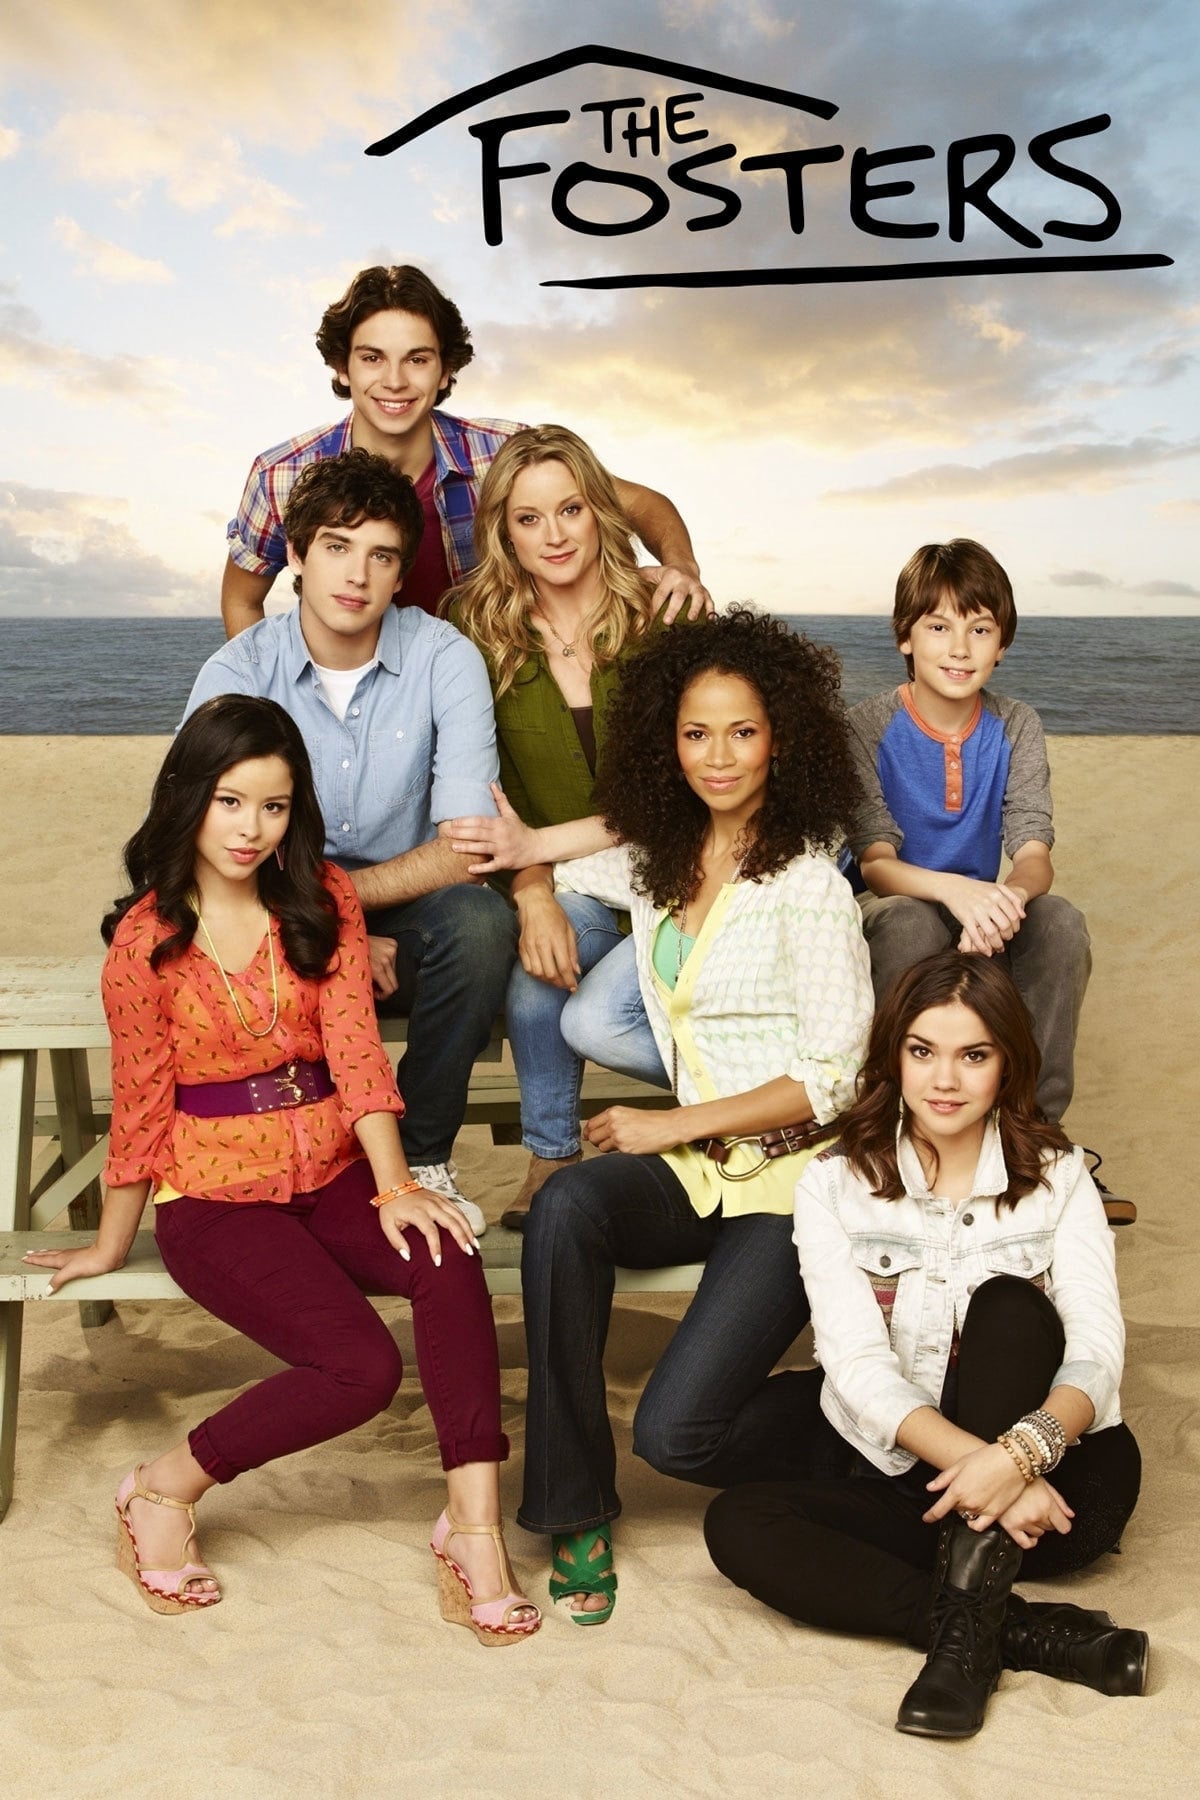 The Fosters TV Shows About Blended Family